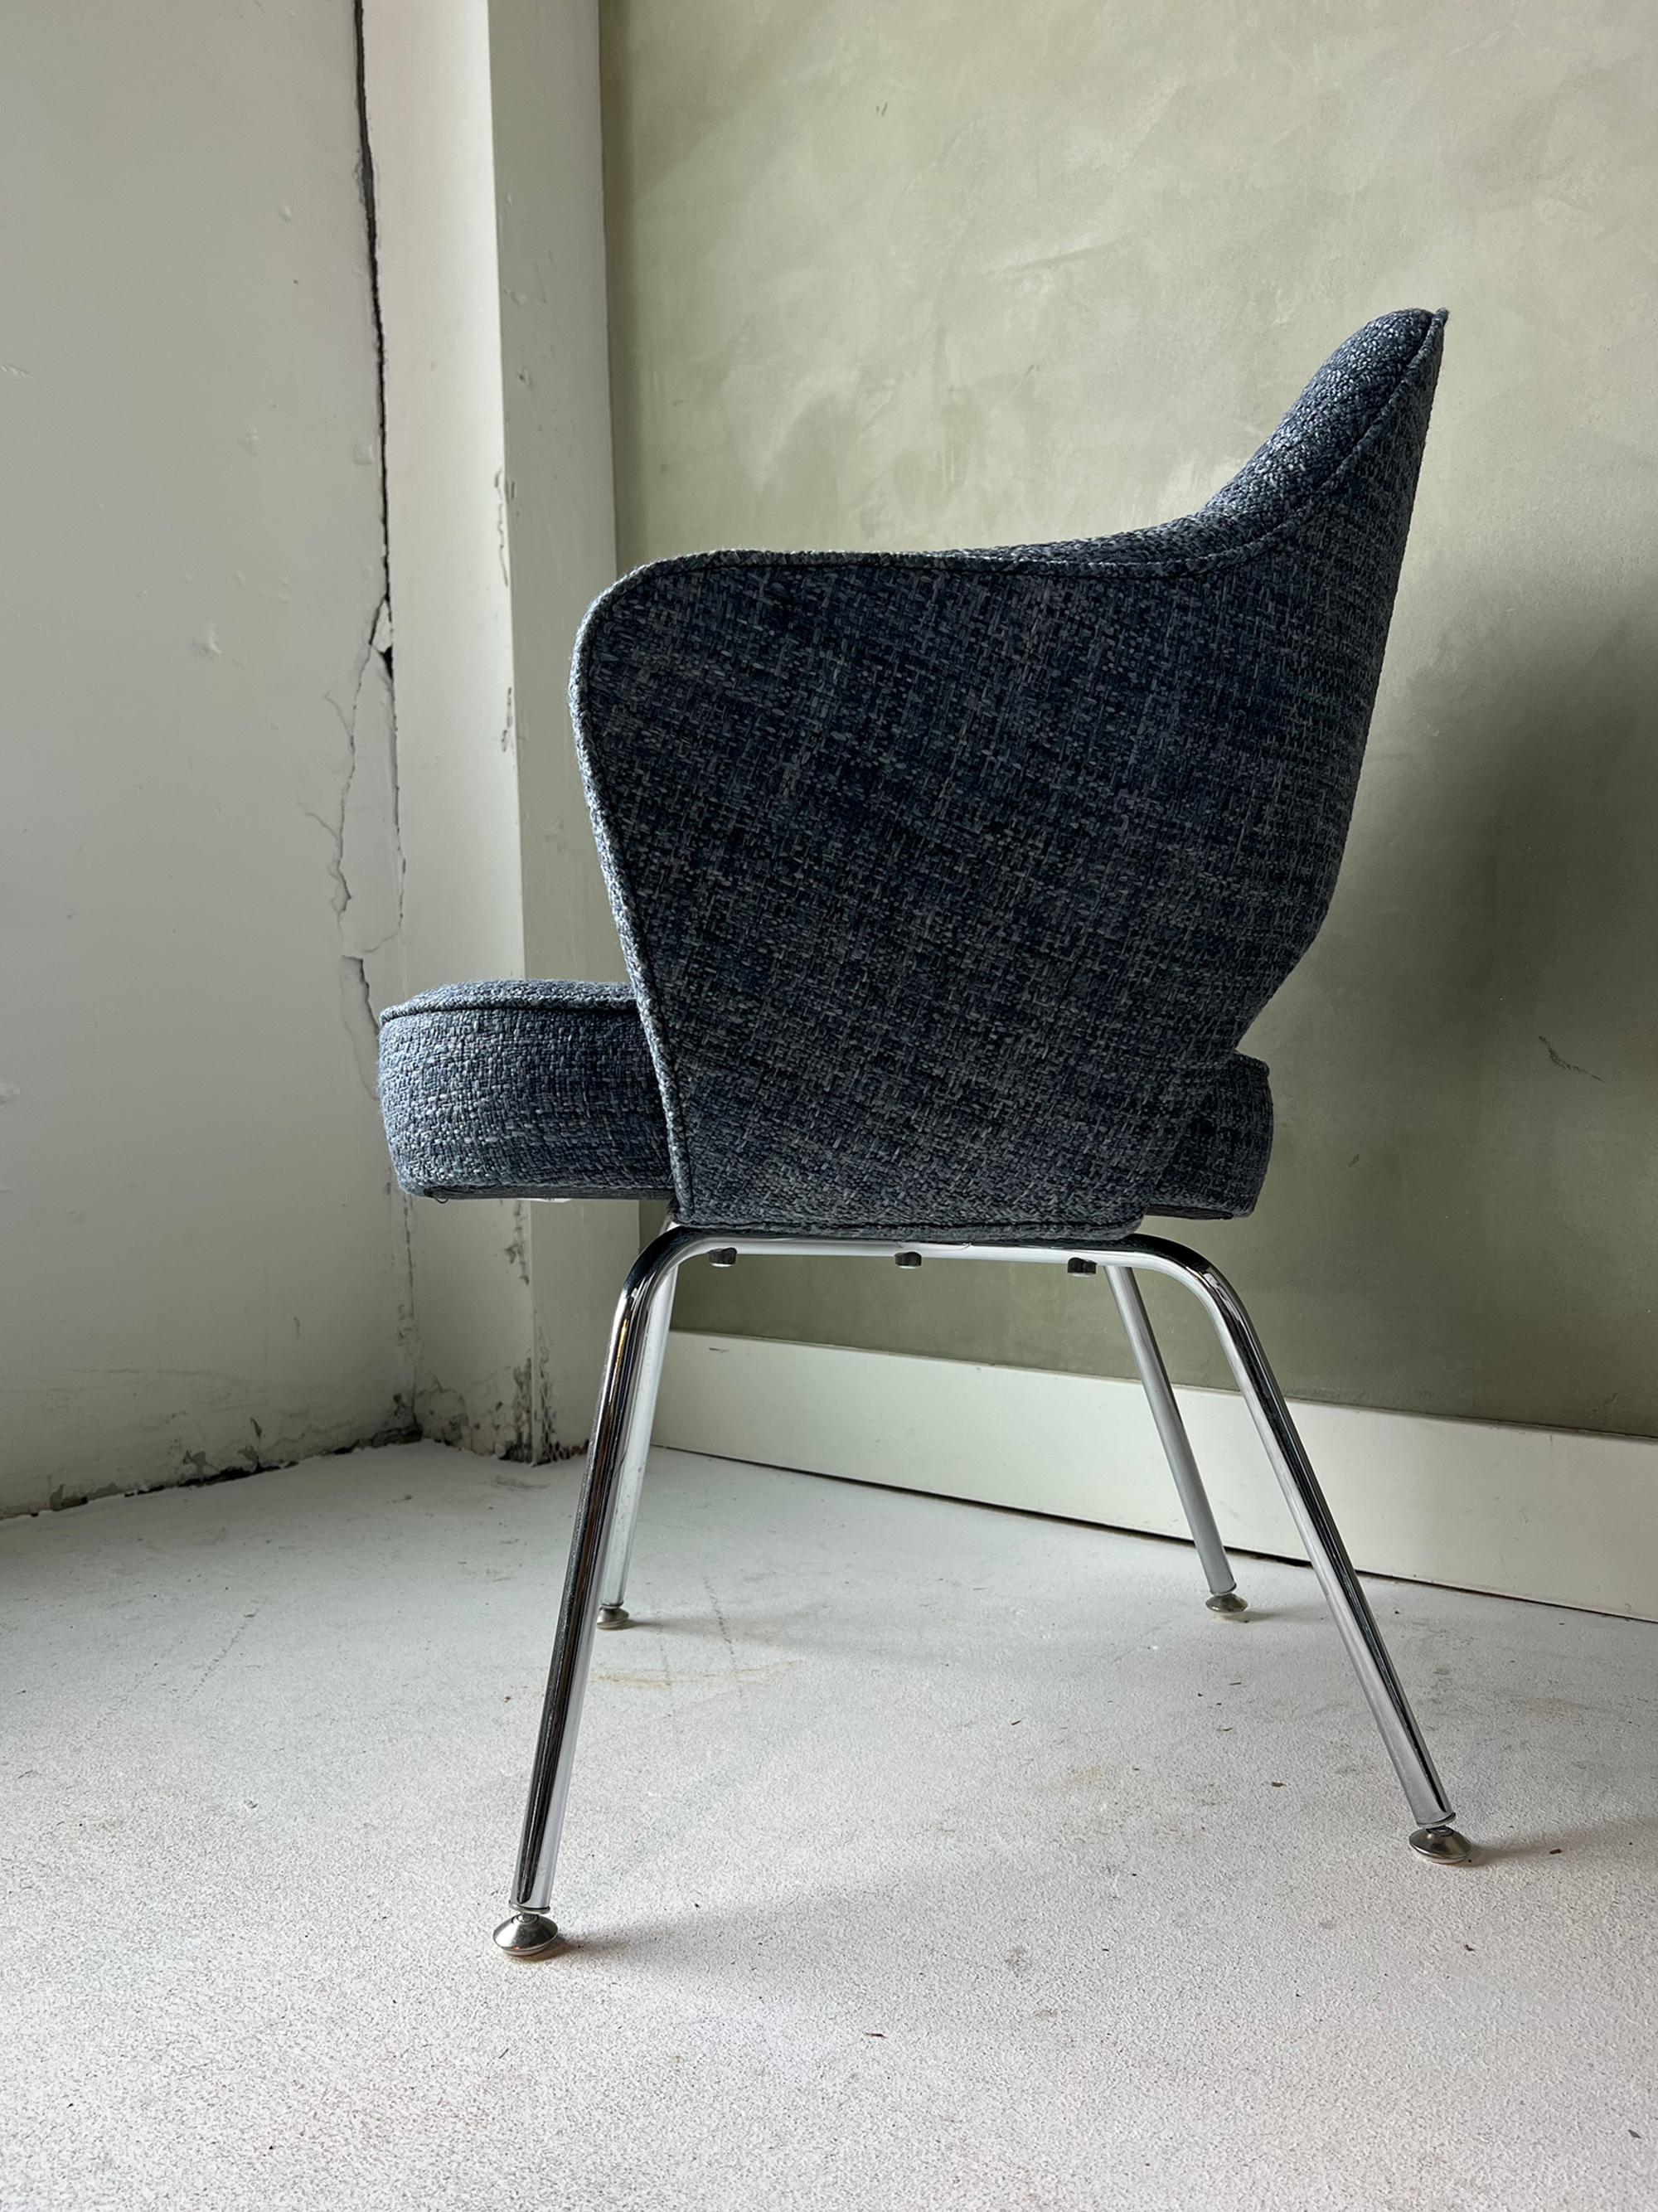 Excellent condition Eero Saarinen Executive Armchair manufactured by Knoll. Upholstery is clean and foam is soft, ready for use. 25 Available.